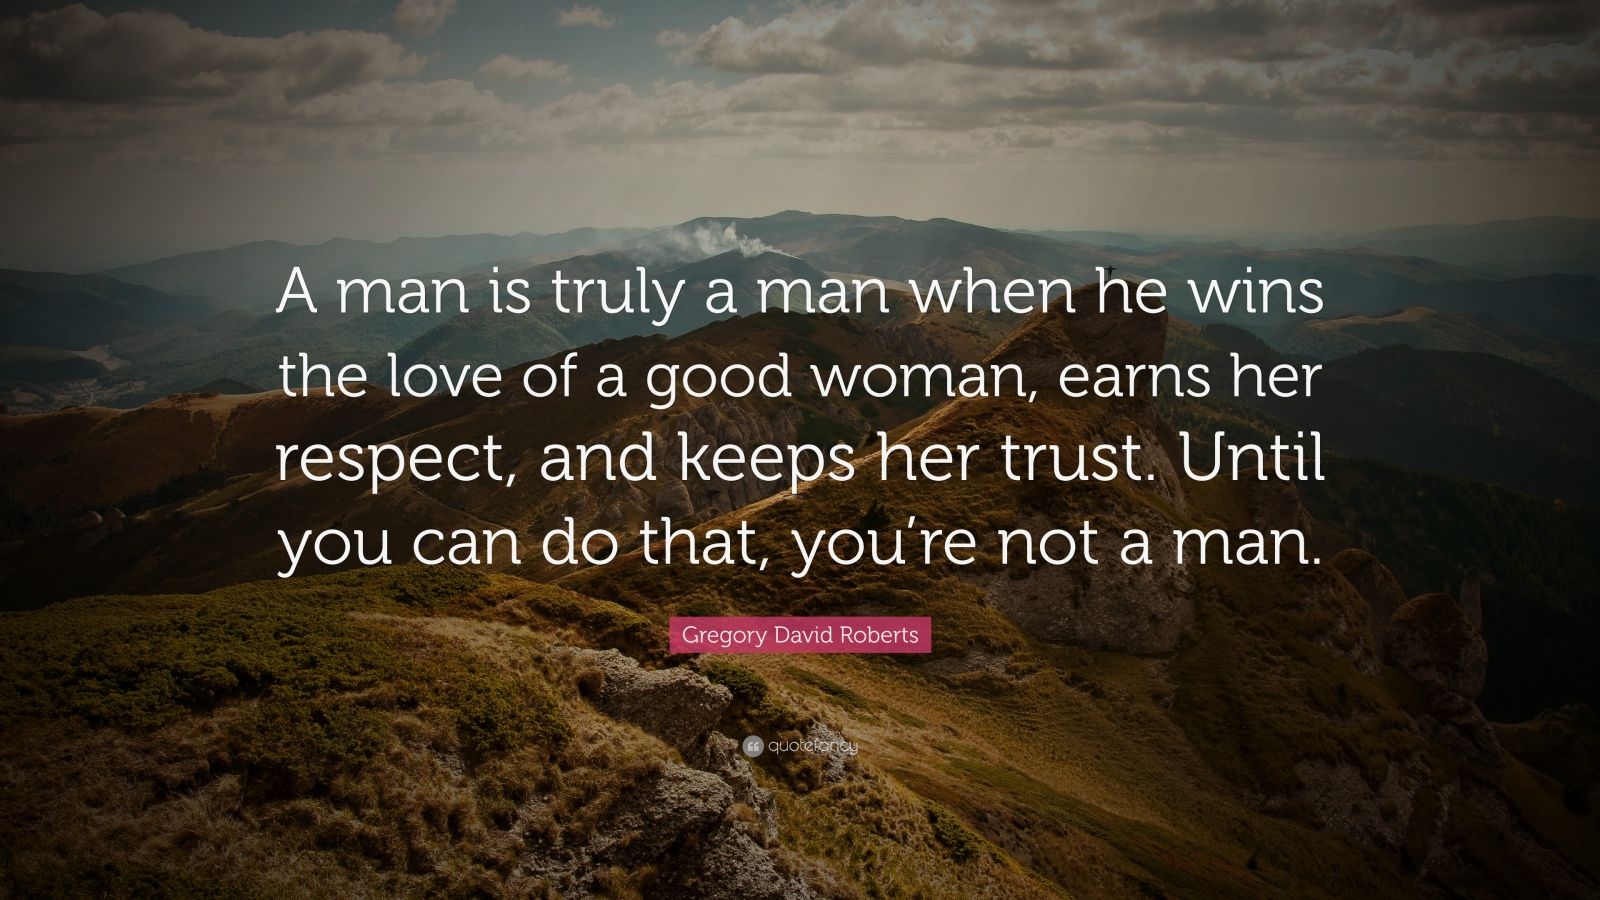 Gregory David Roberts Quote “A man is truly a man when he wins the